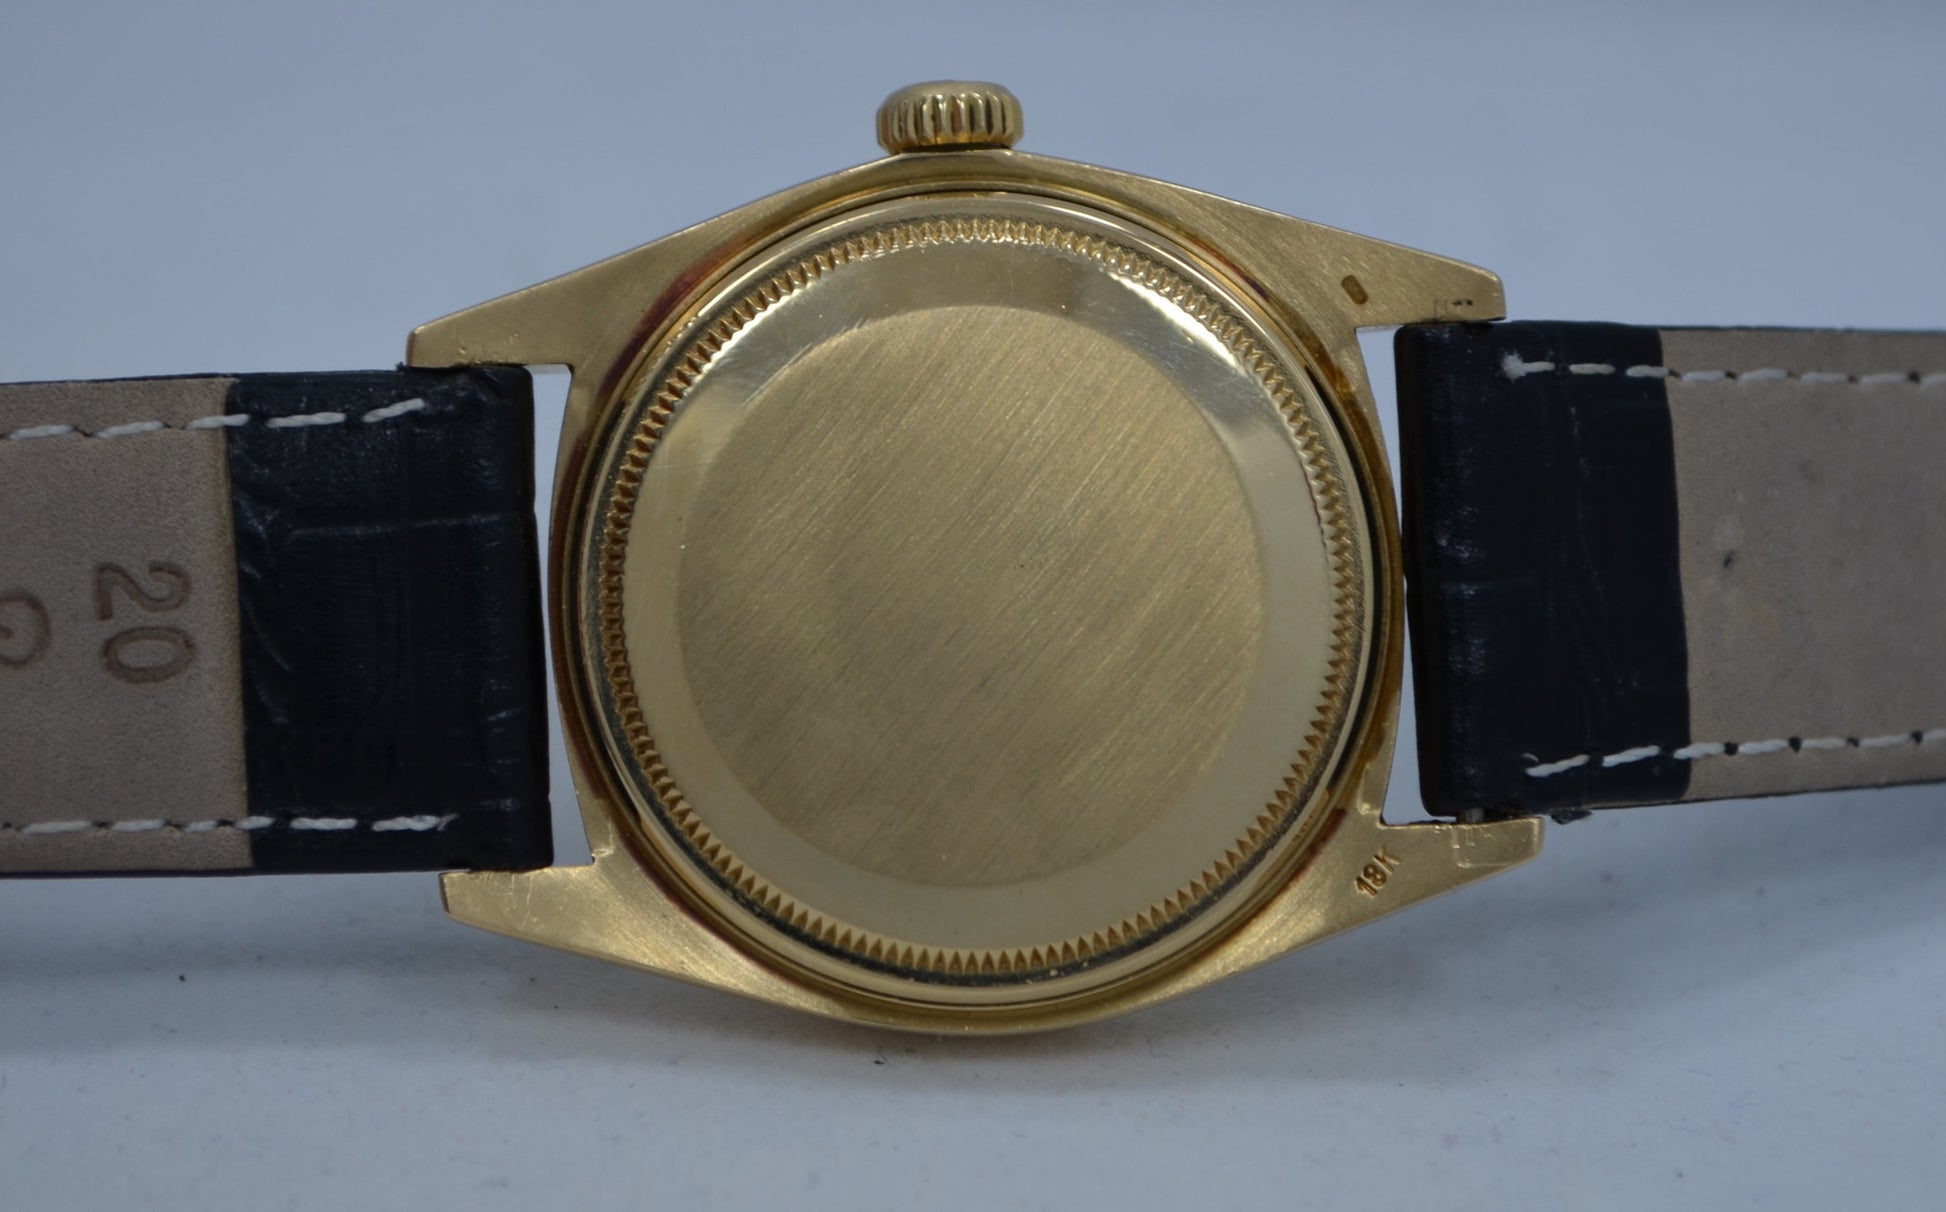 Vintage Rolex 1803 President Day Date 3.6 Mil 1972 18K Yellow Gold Wristwatch - Hashtag Watch Company